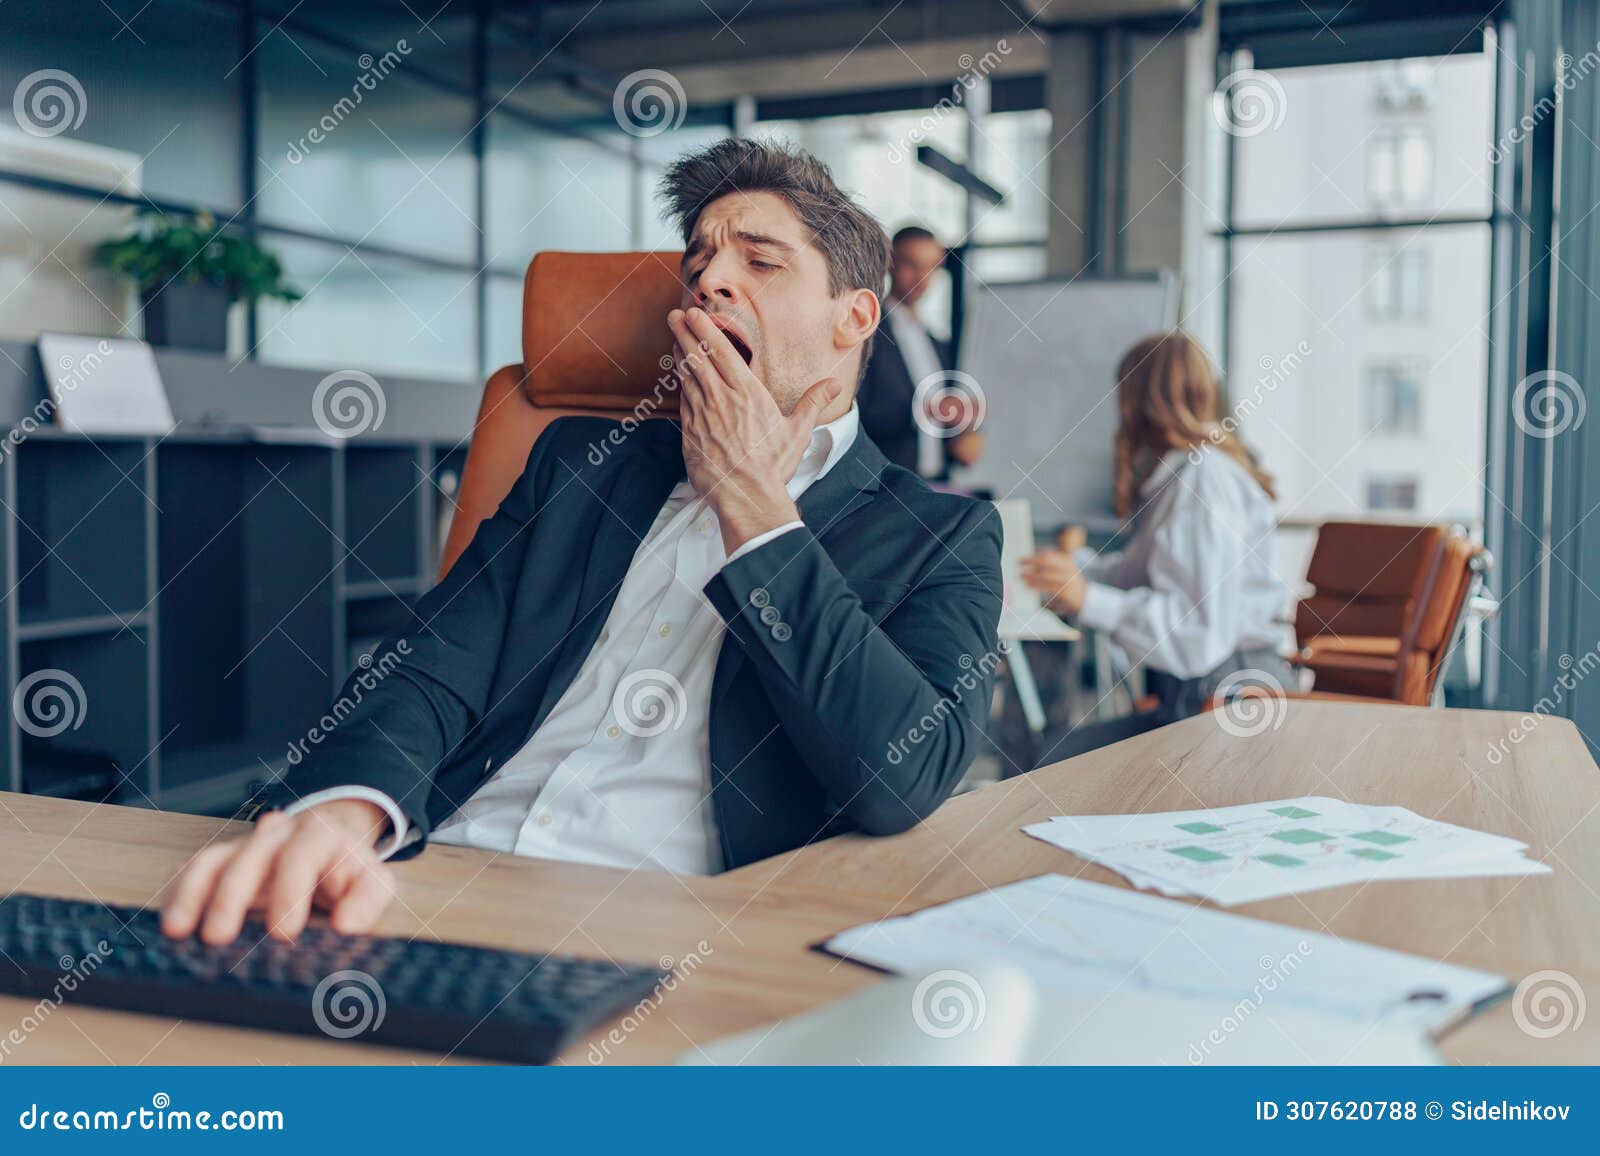 young overtired businessman yawning while working inside modern office with computer